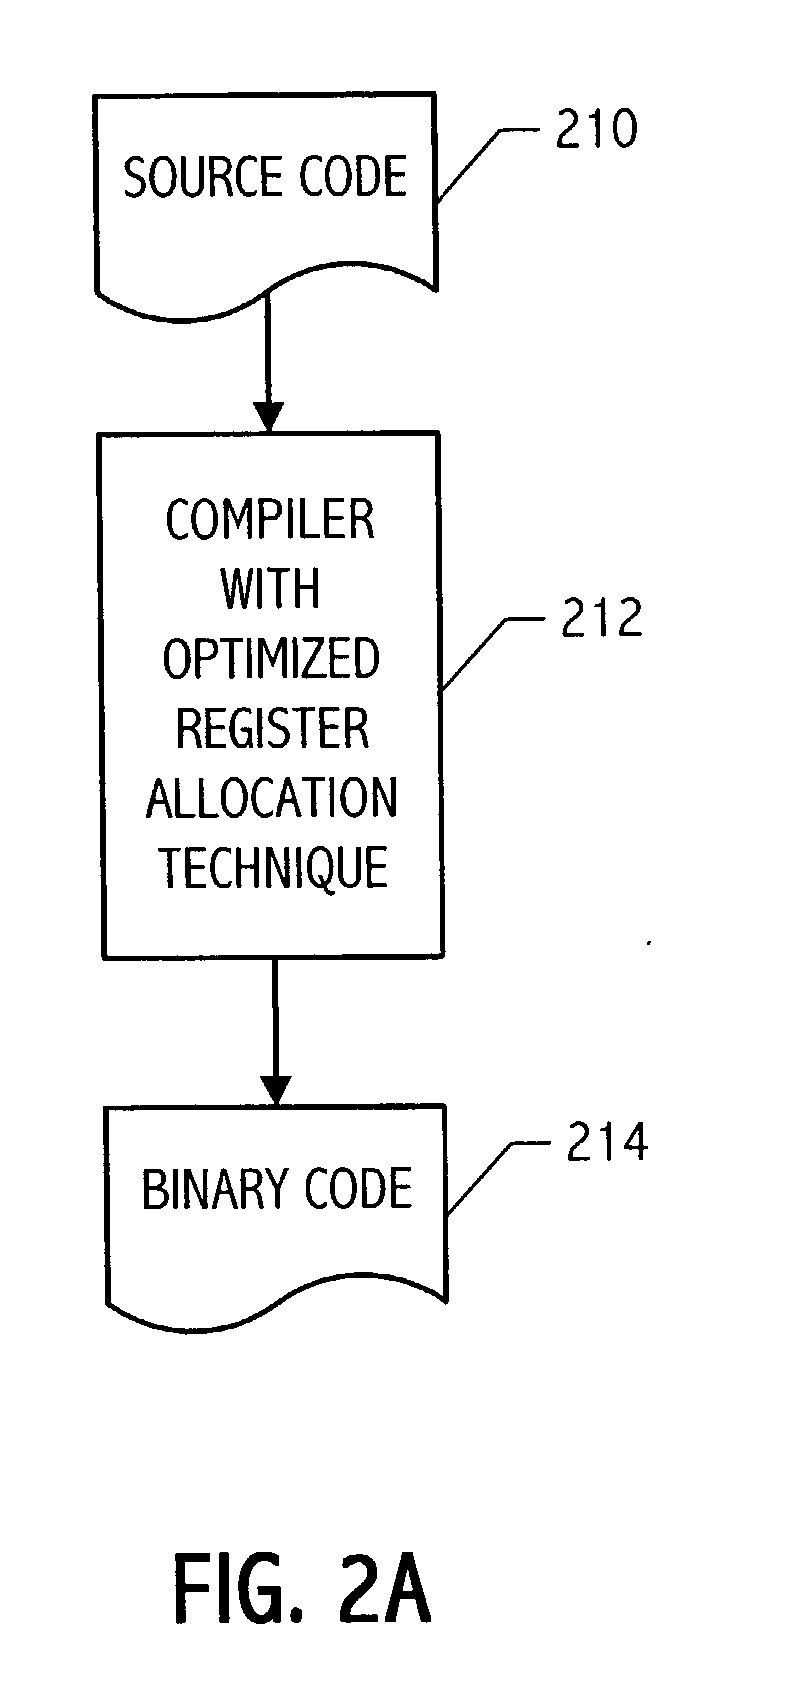 Optimal register allocation in compilers